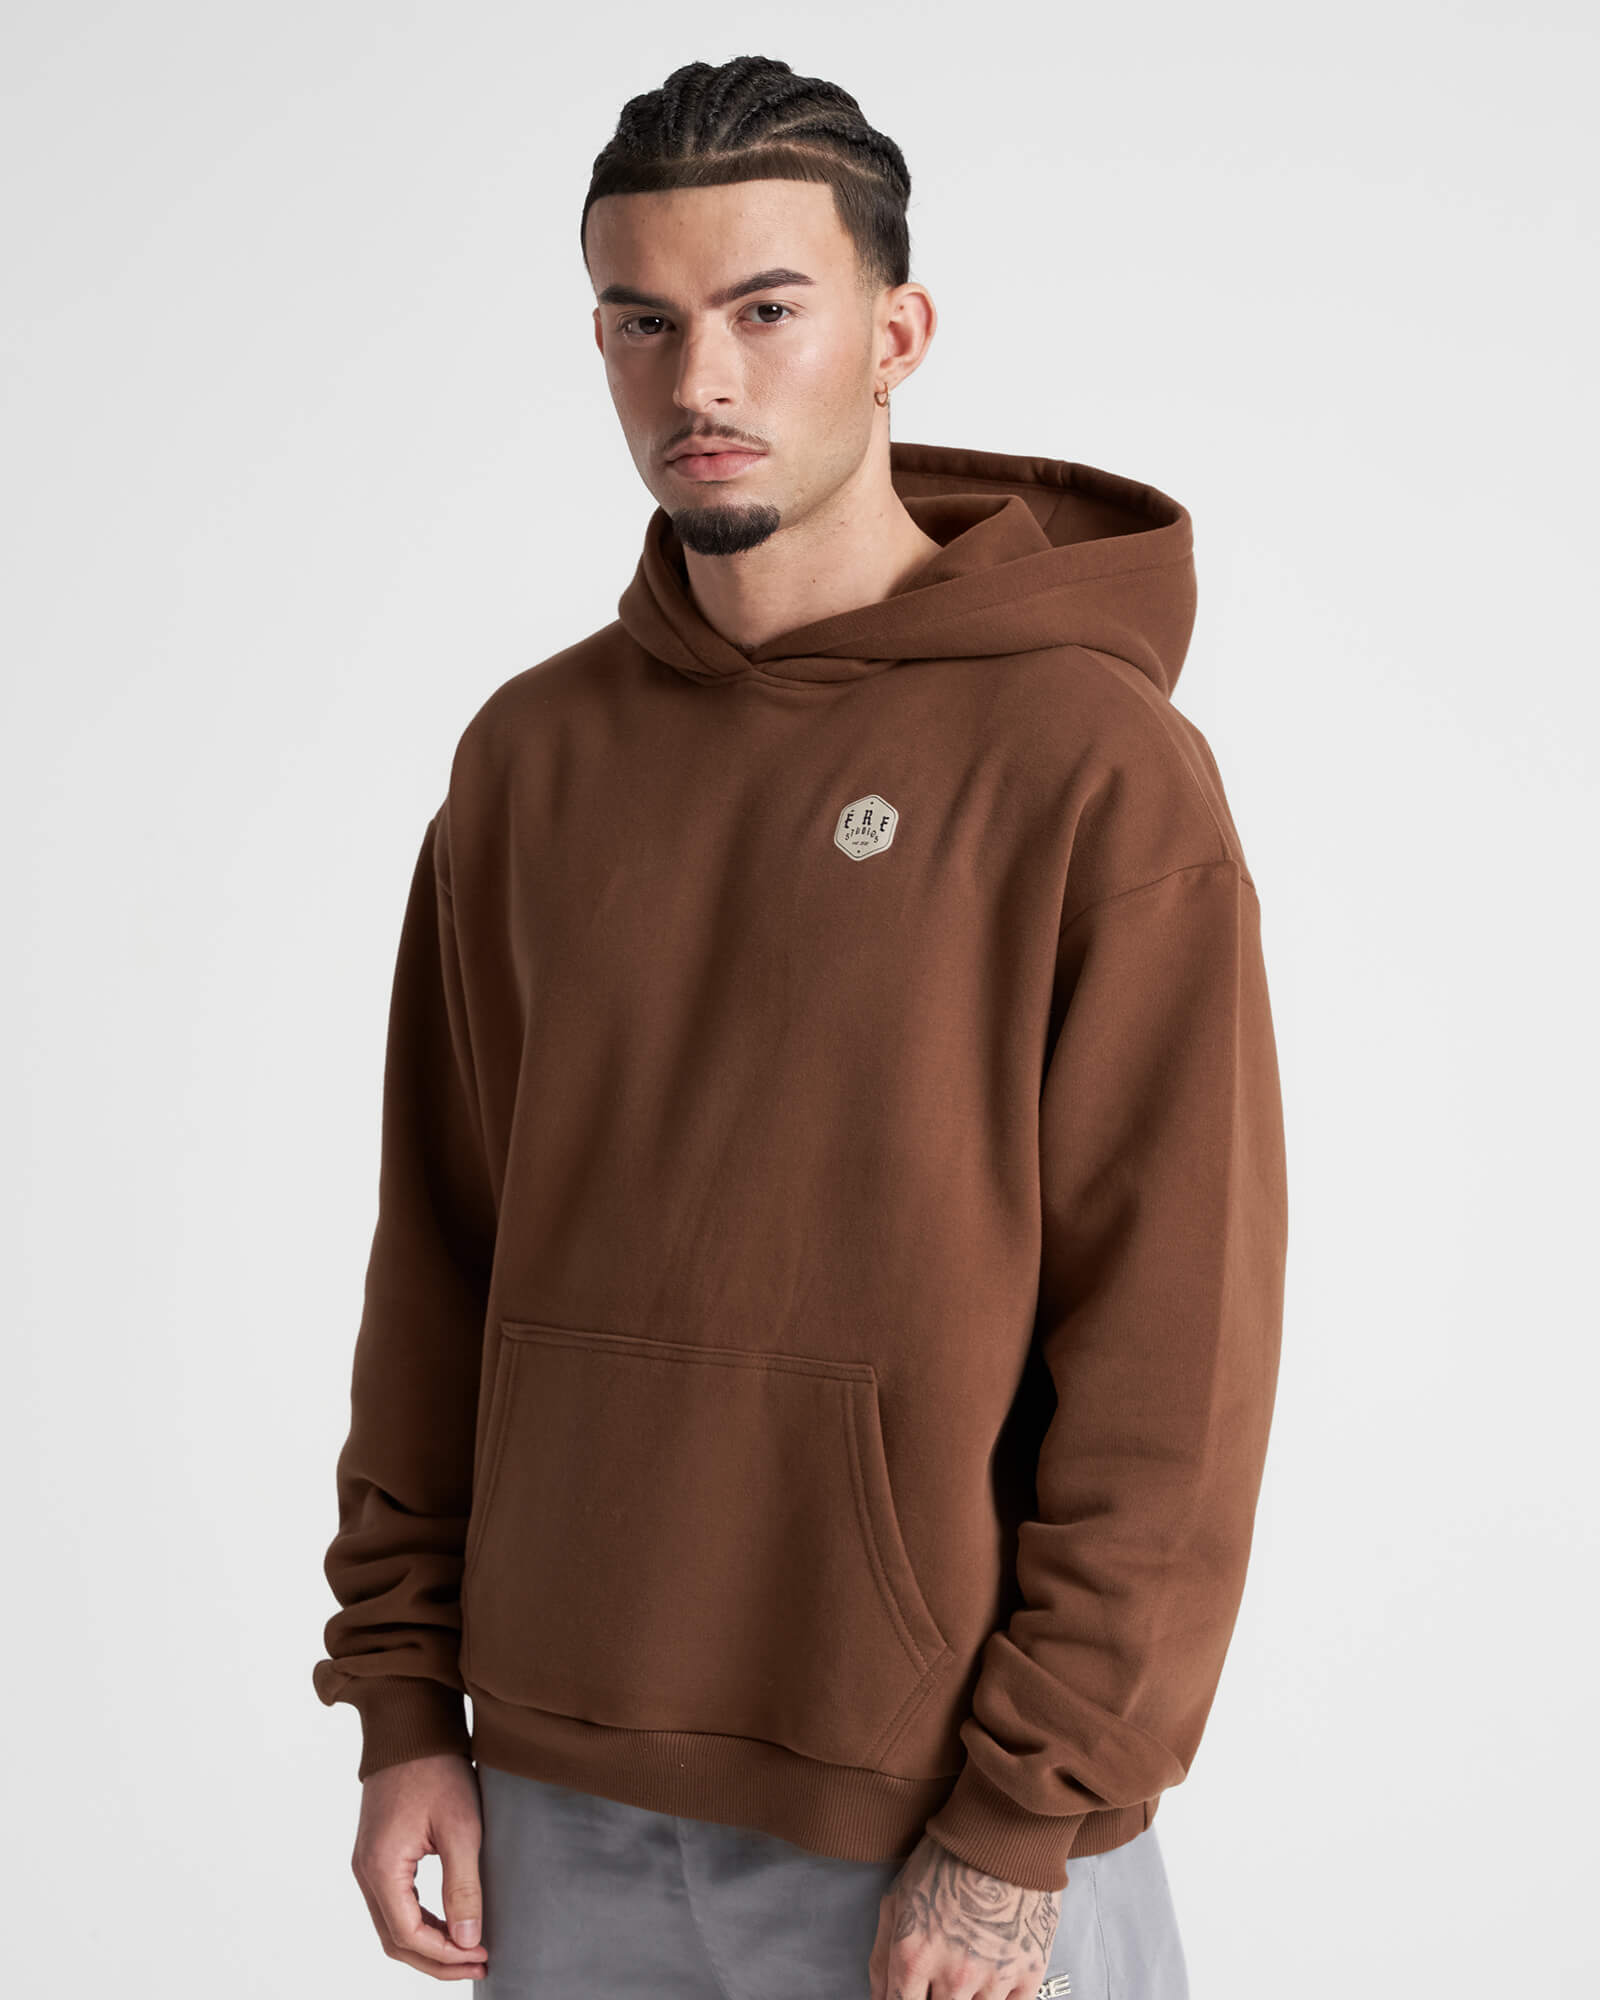 Locked Up Hoodie - Cocoa Brown